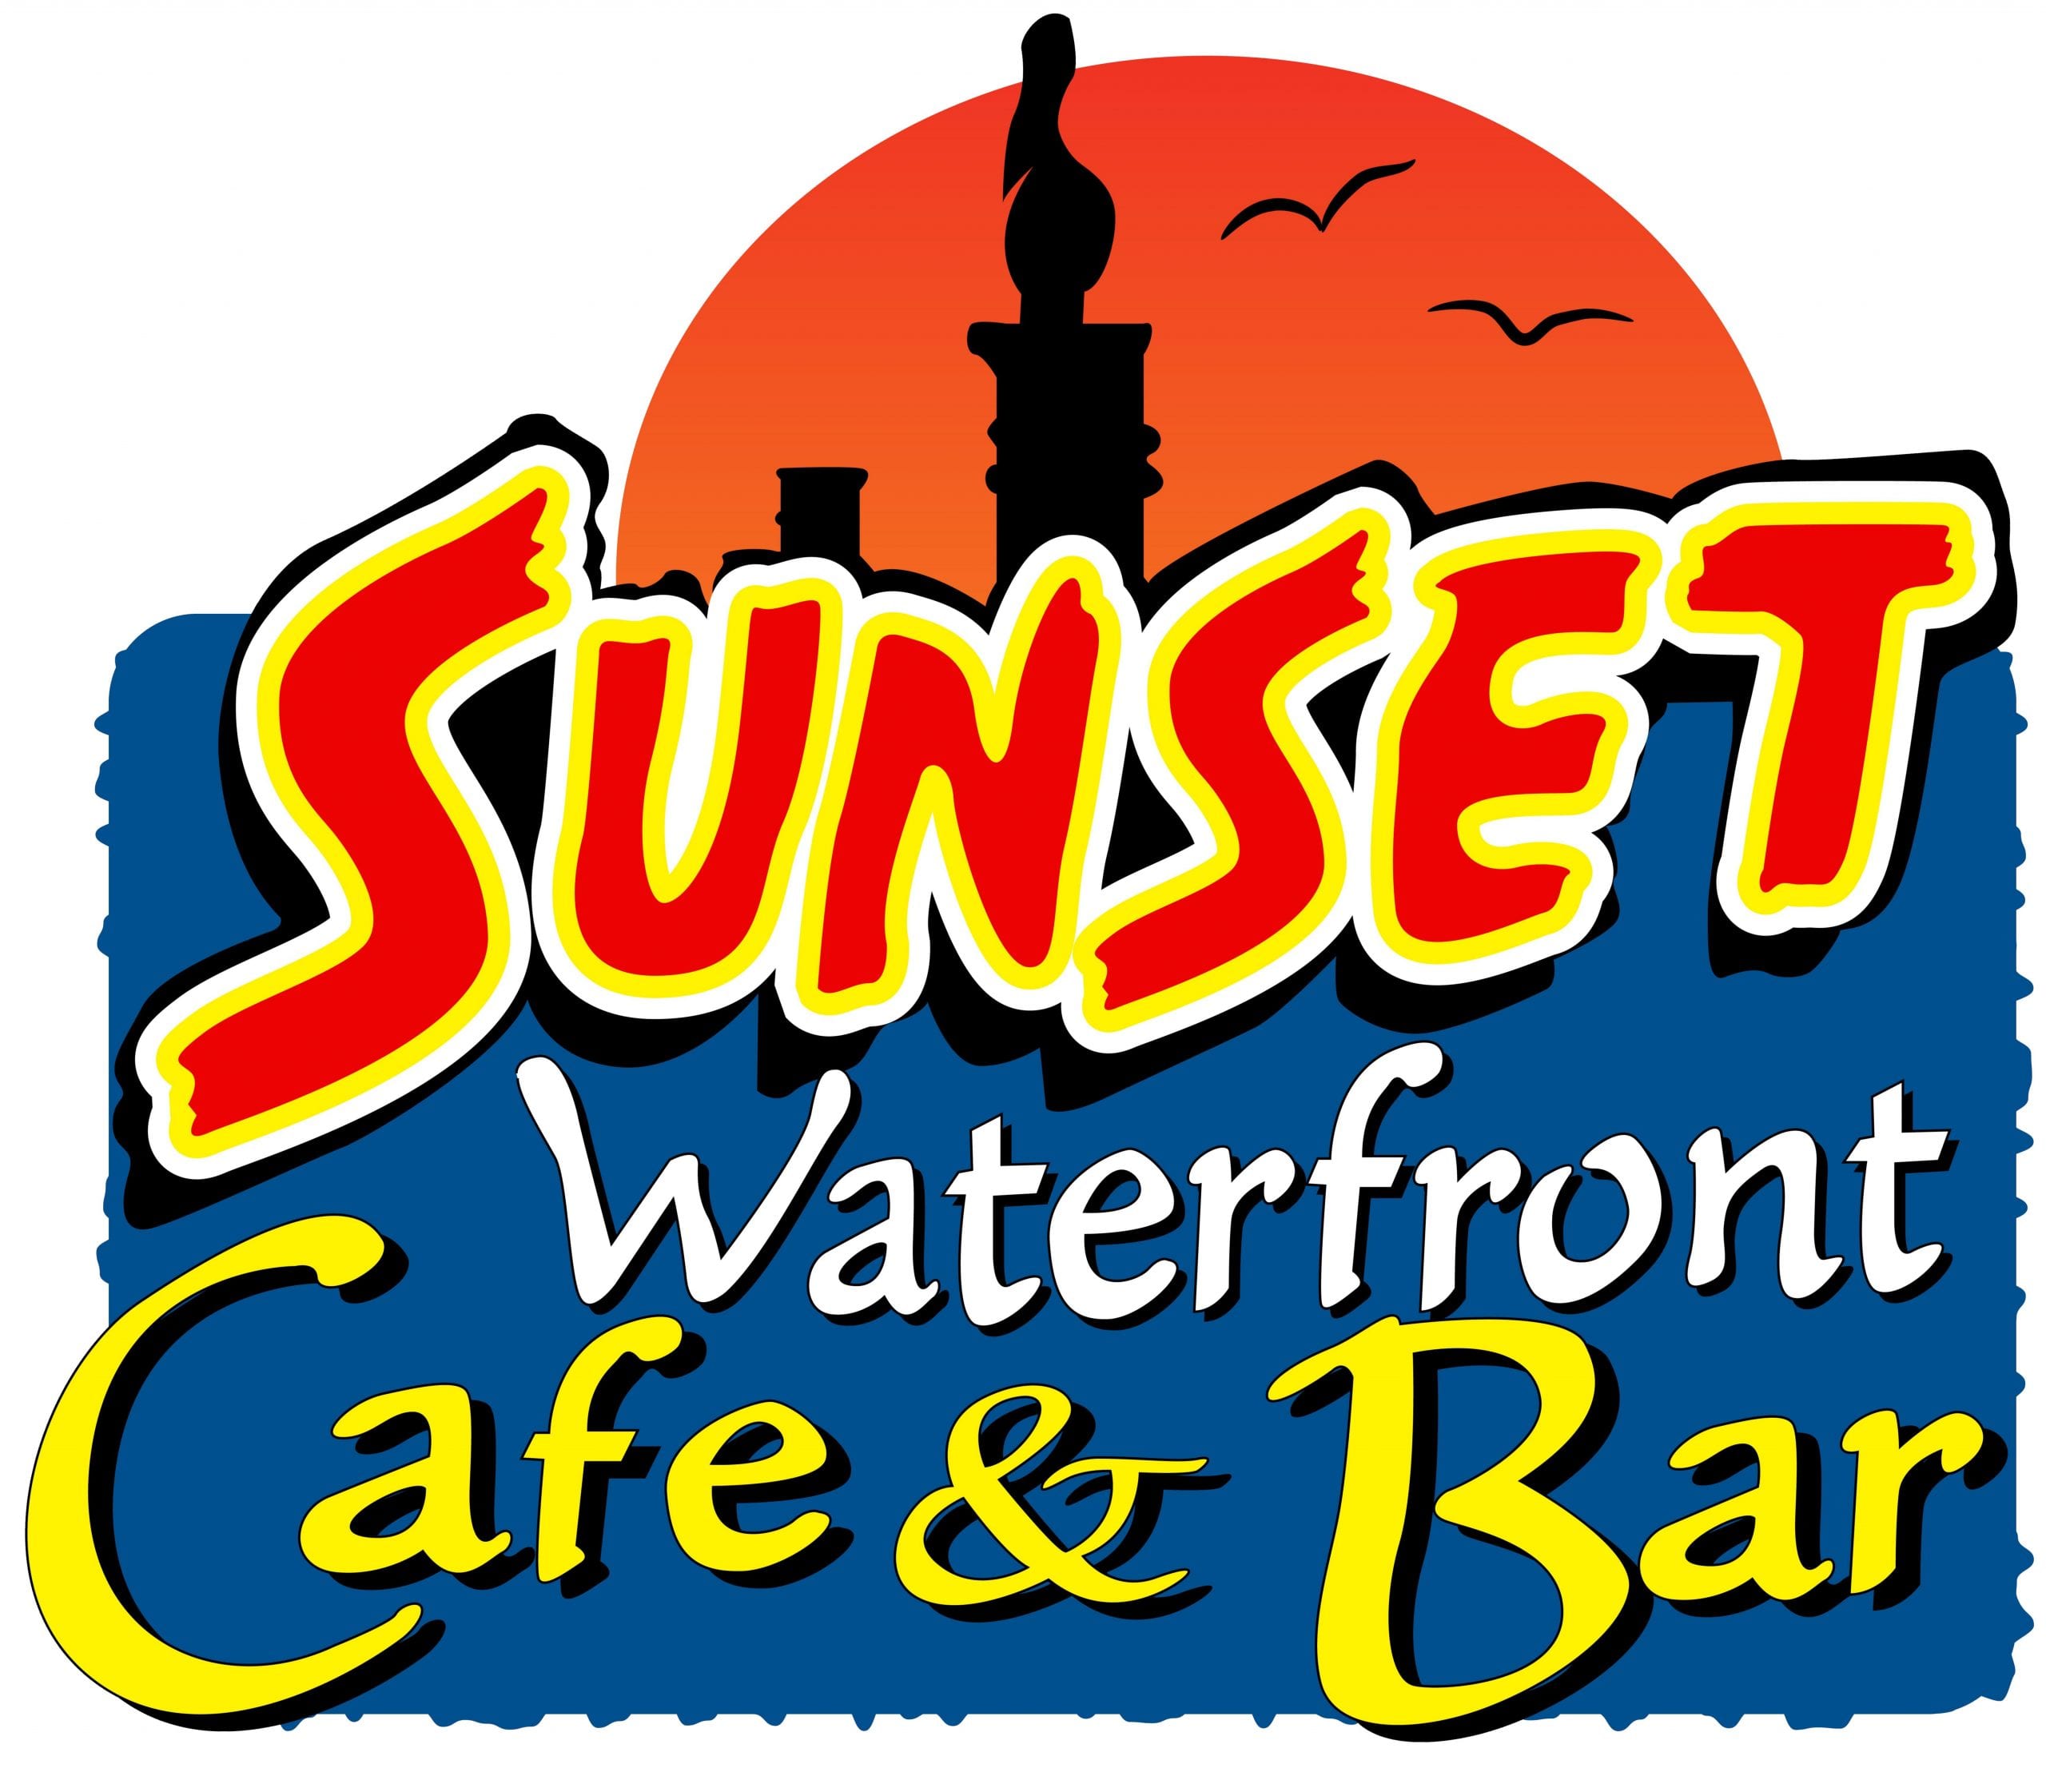 Sunset Waterfront Cafe and Bar restaurant logo